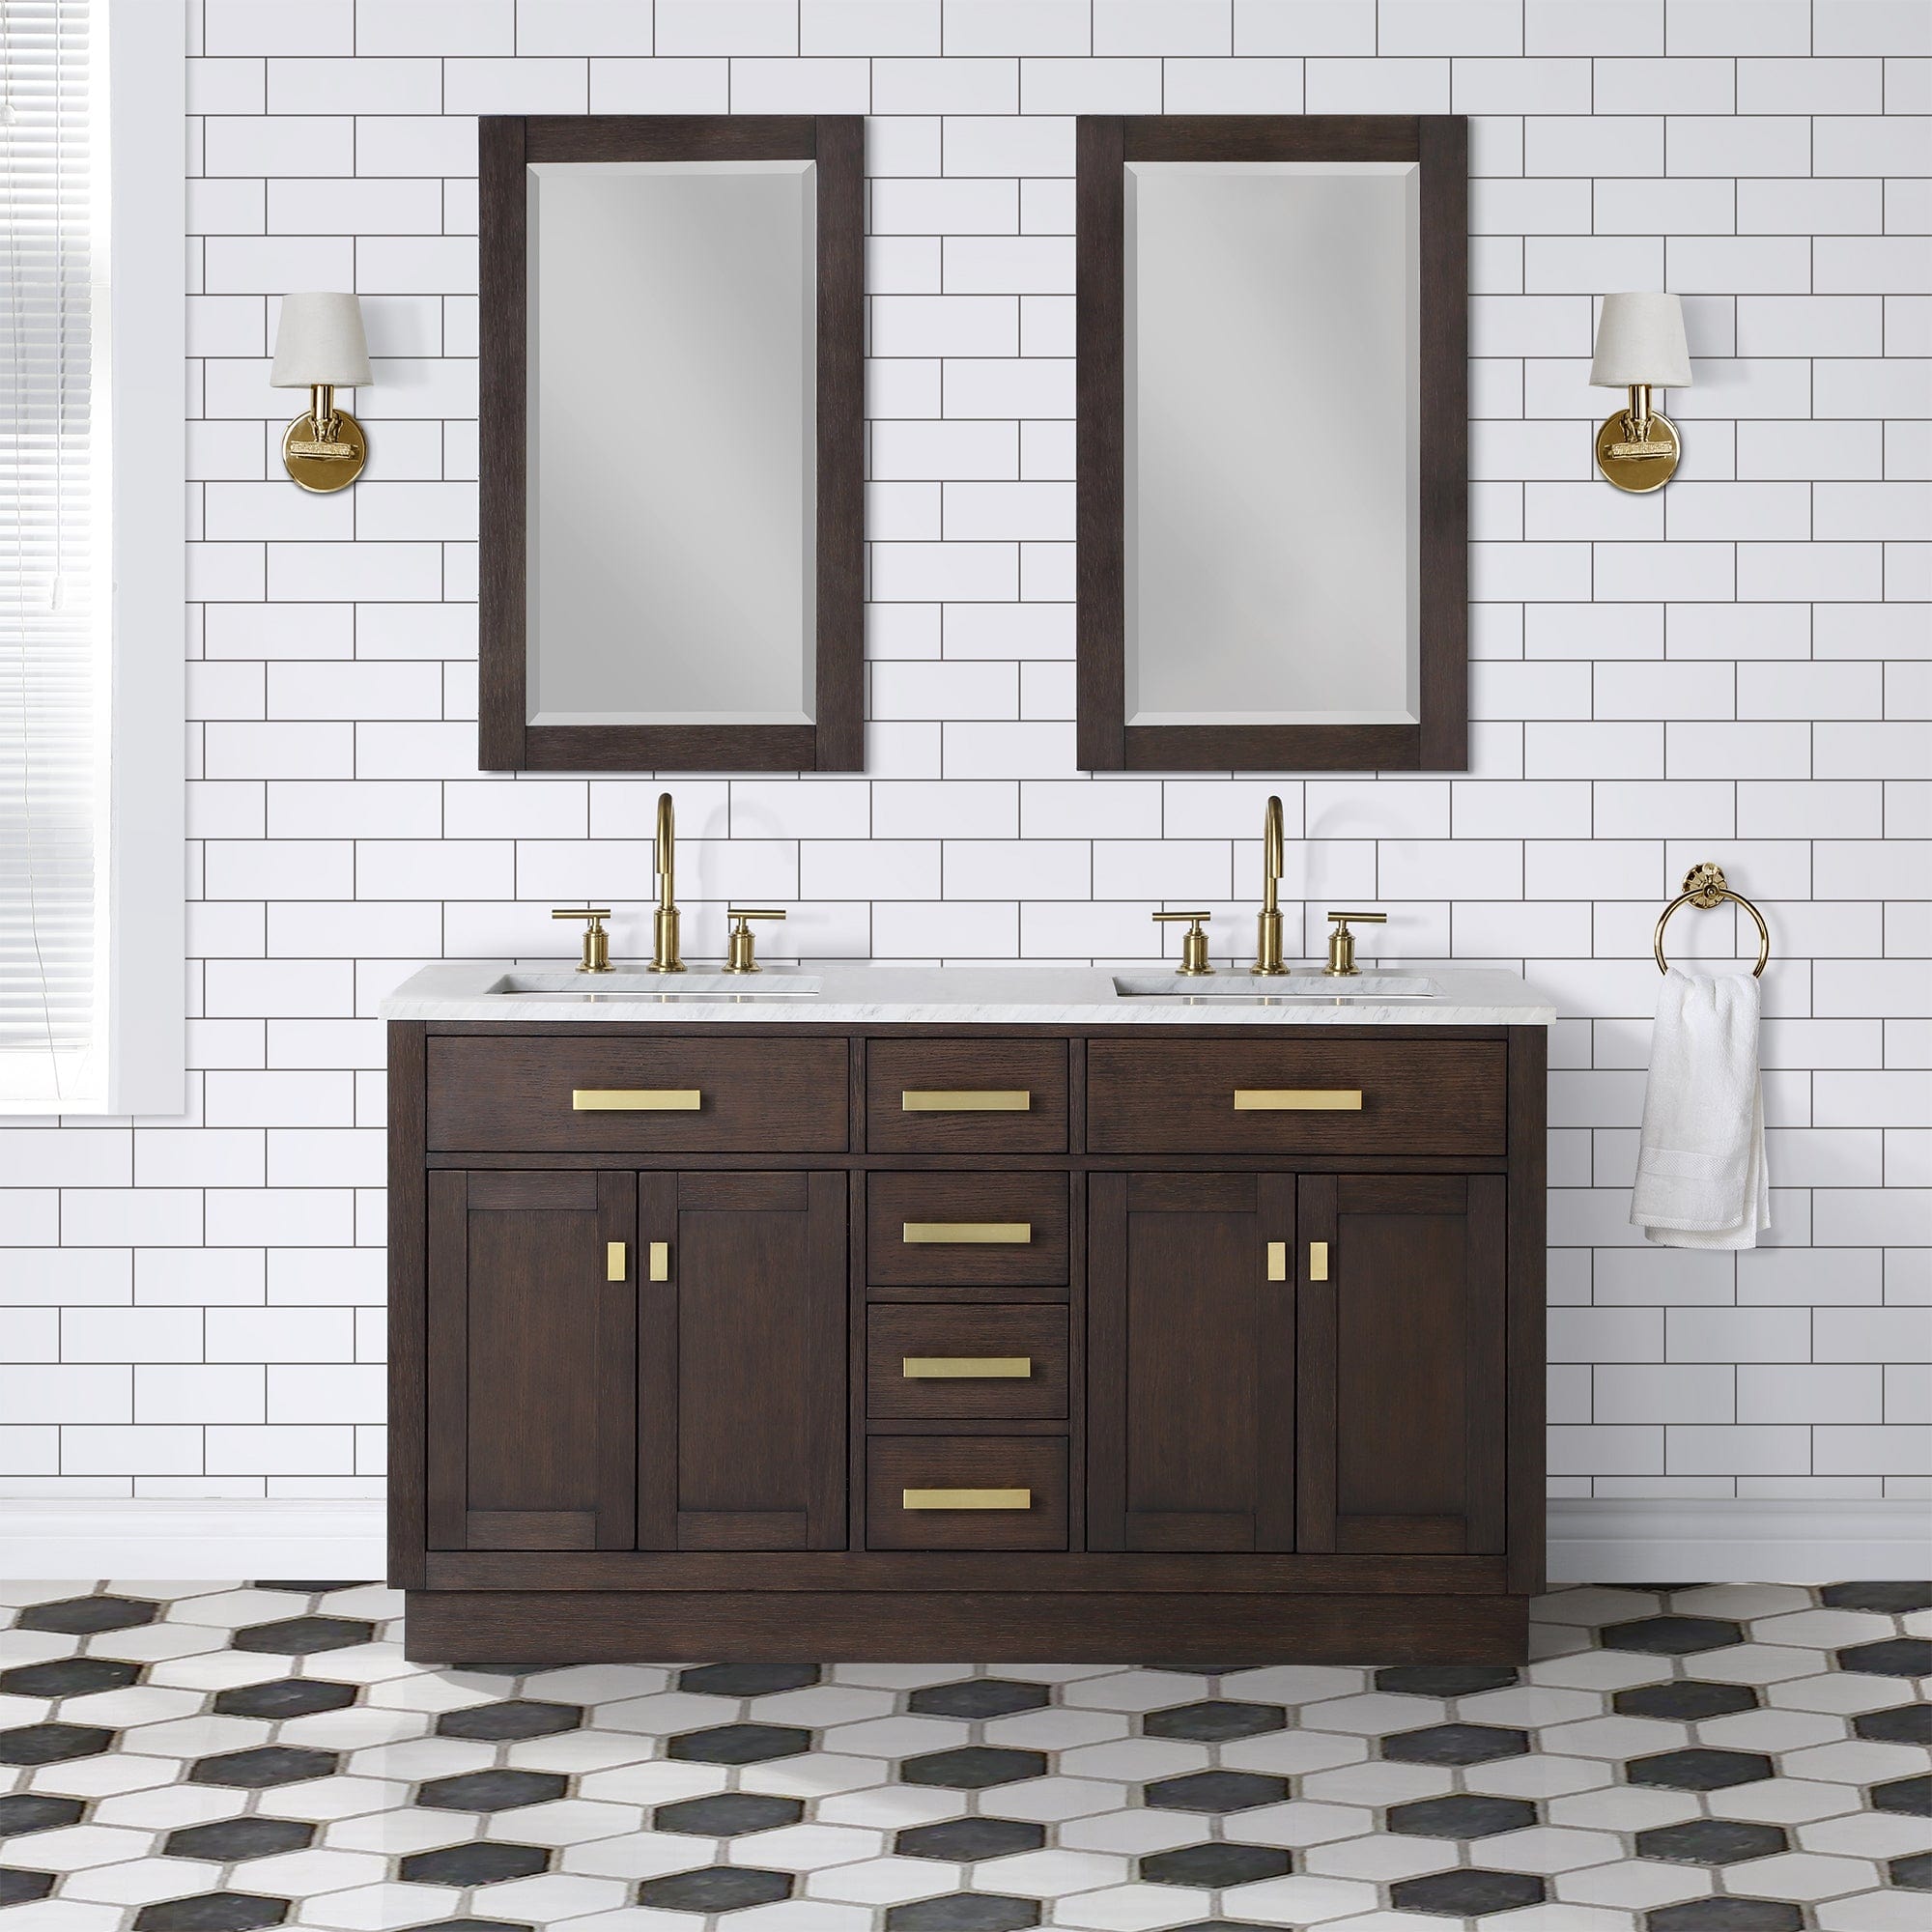 Chestnut 60 In. Double Sink Carrara White Marble Countertop Vanity In Brown Oak with Grooseneck Faucets and Mirrors - Molaix732030764842CH60CW06BK-R21BL1406